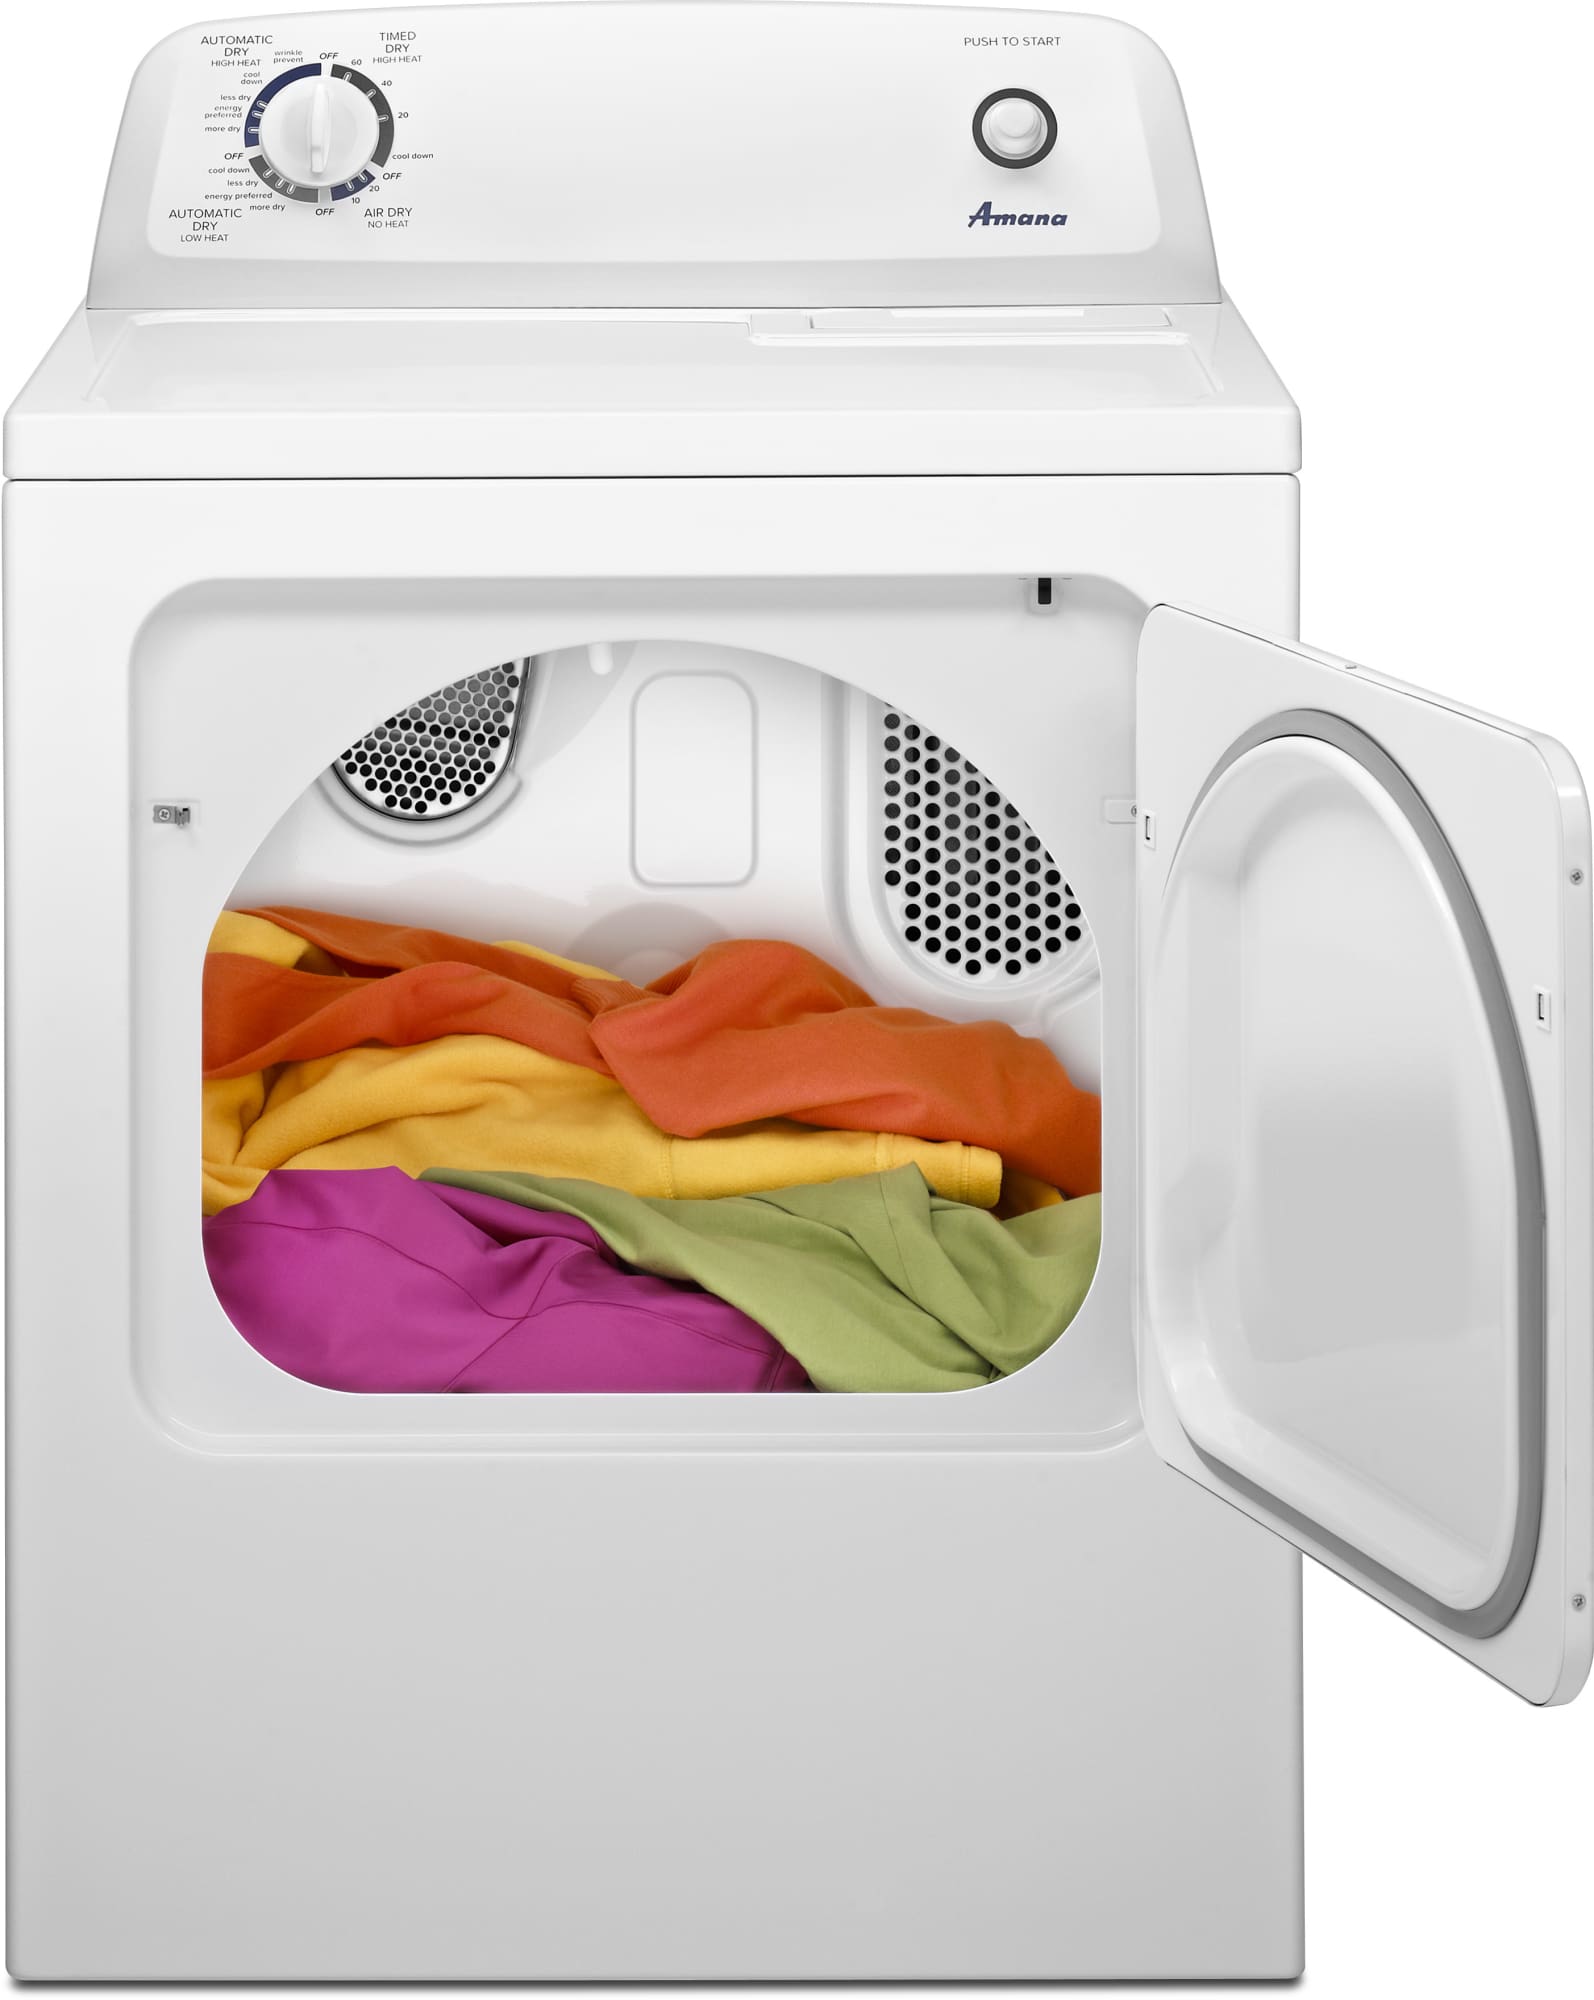 amana-ngd4655ew-29-inch-front-load-gas-dryer-with-6-5-cu-ft-capacity